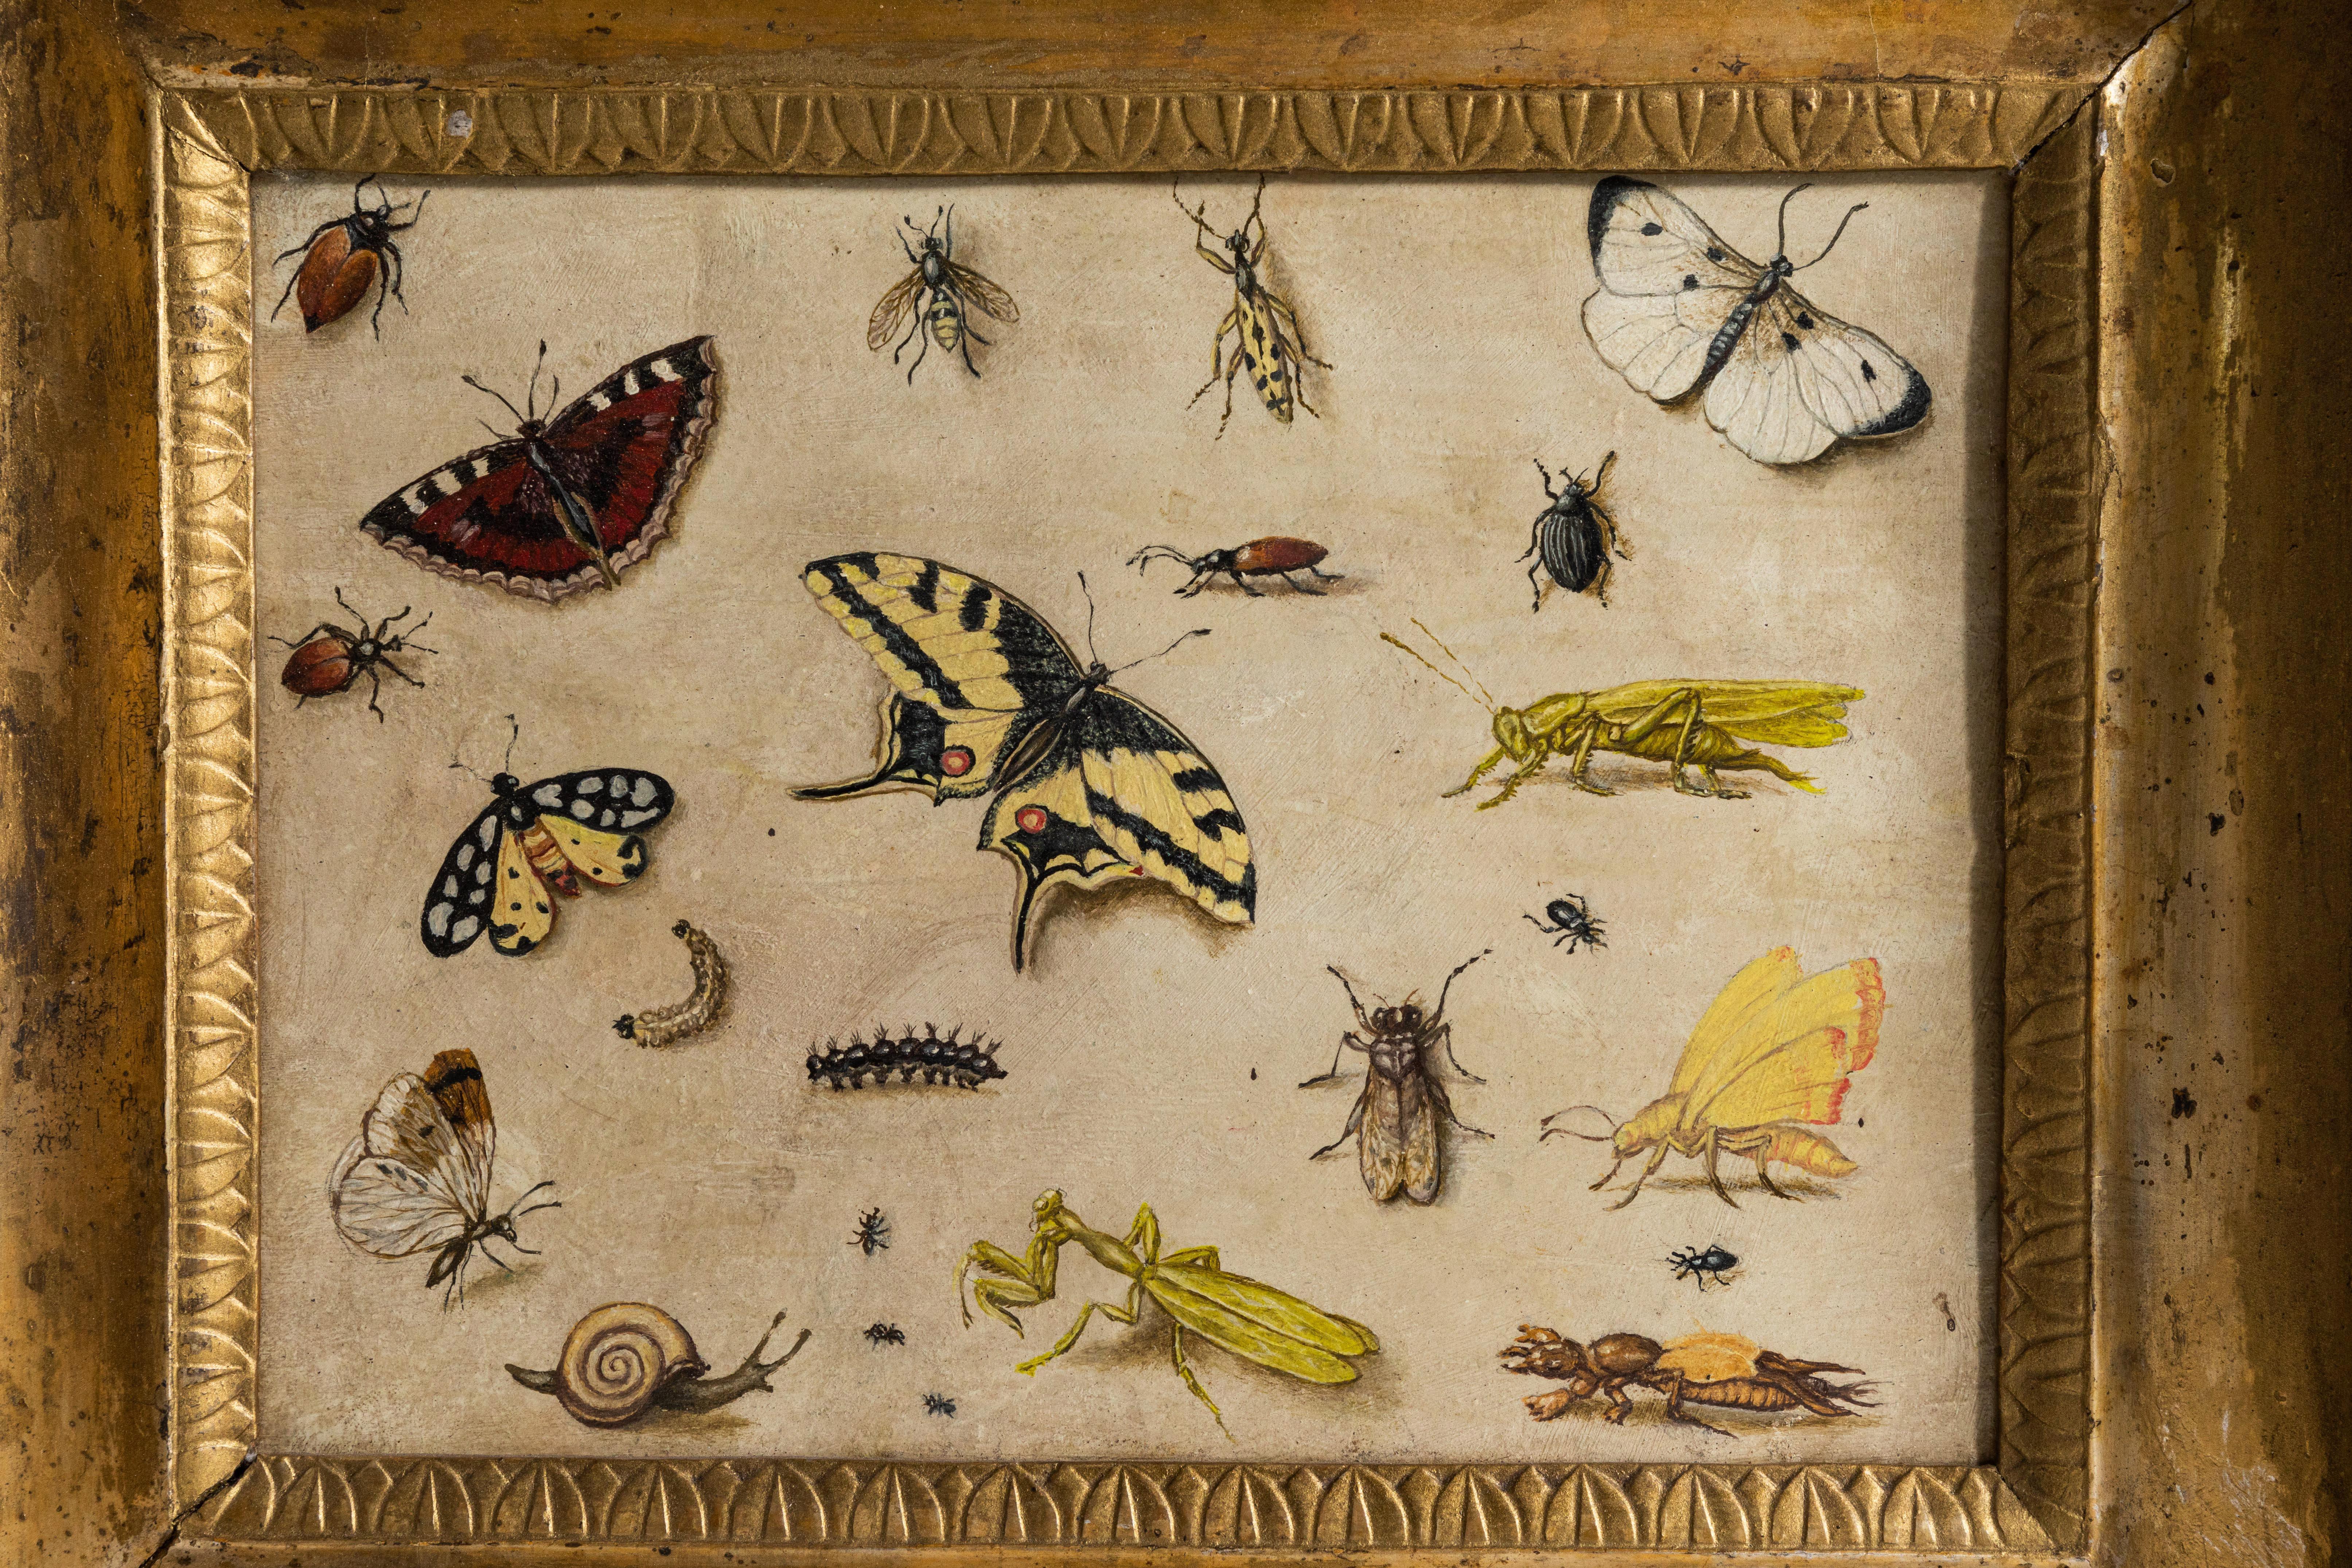 Stunningly rendered, 17th century, richly colored, oil-on-copper painting of insect specimens from the circle of important Flemish artist, Jan vans Kessel (1626-1679). Held in a period, giltwood frame.

Unframed dimensions: 8.75” H x 10.5” W.